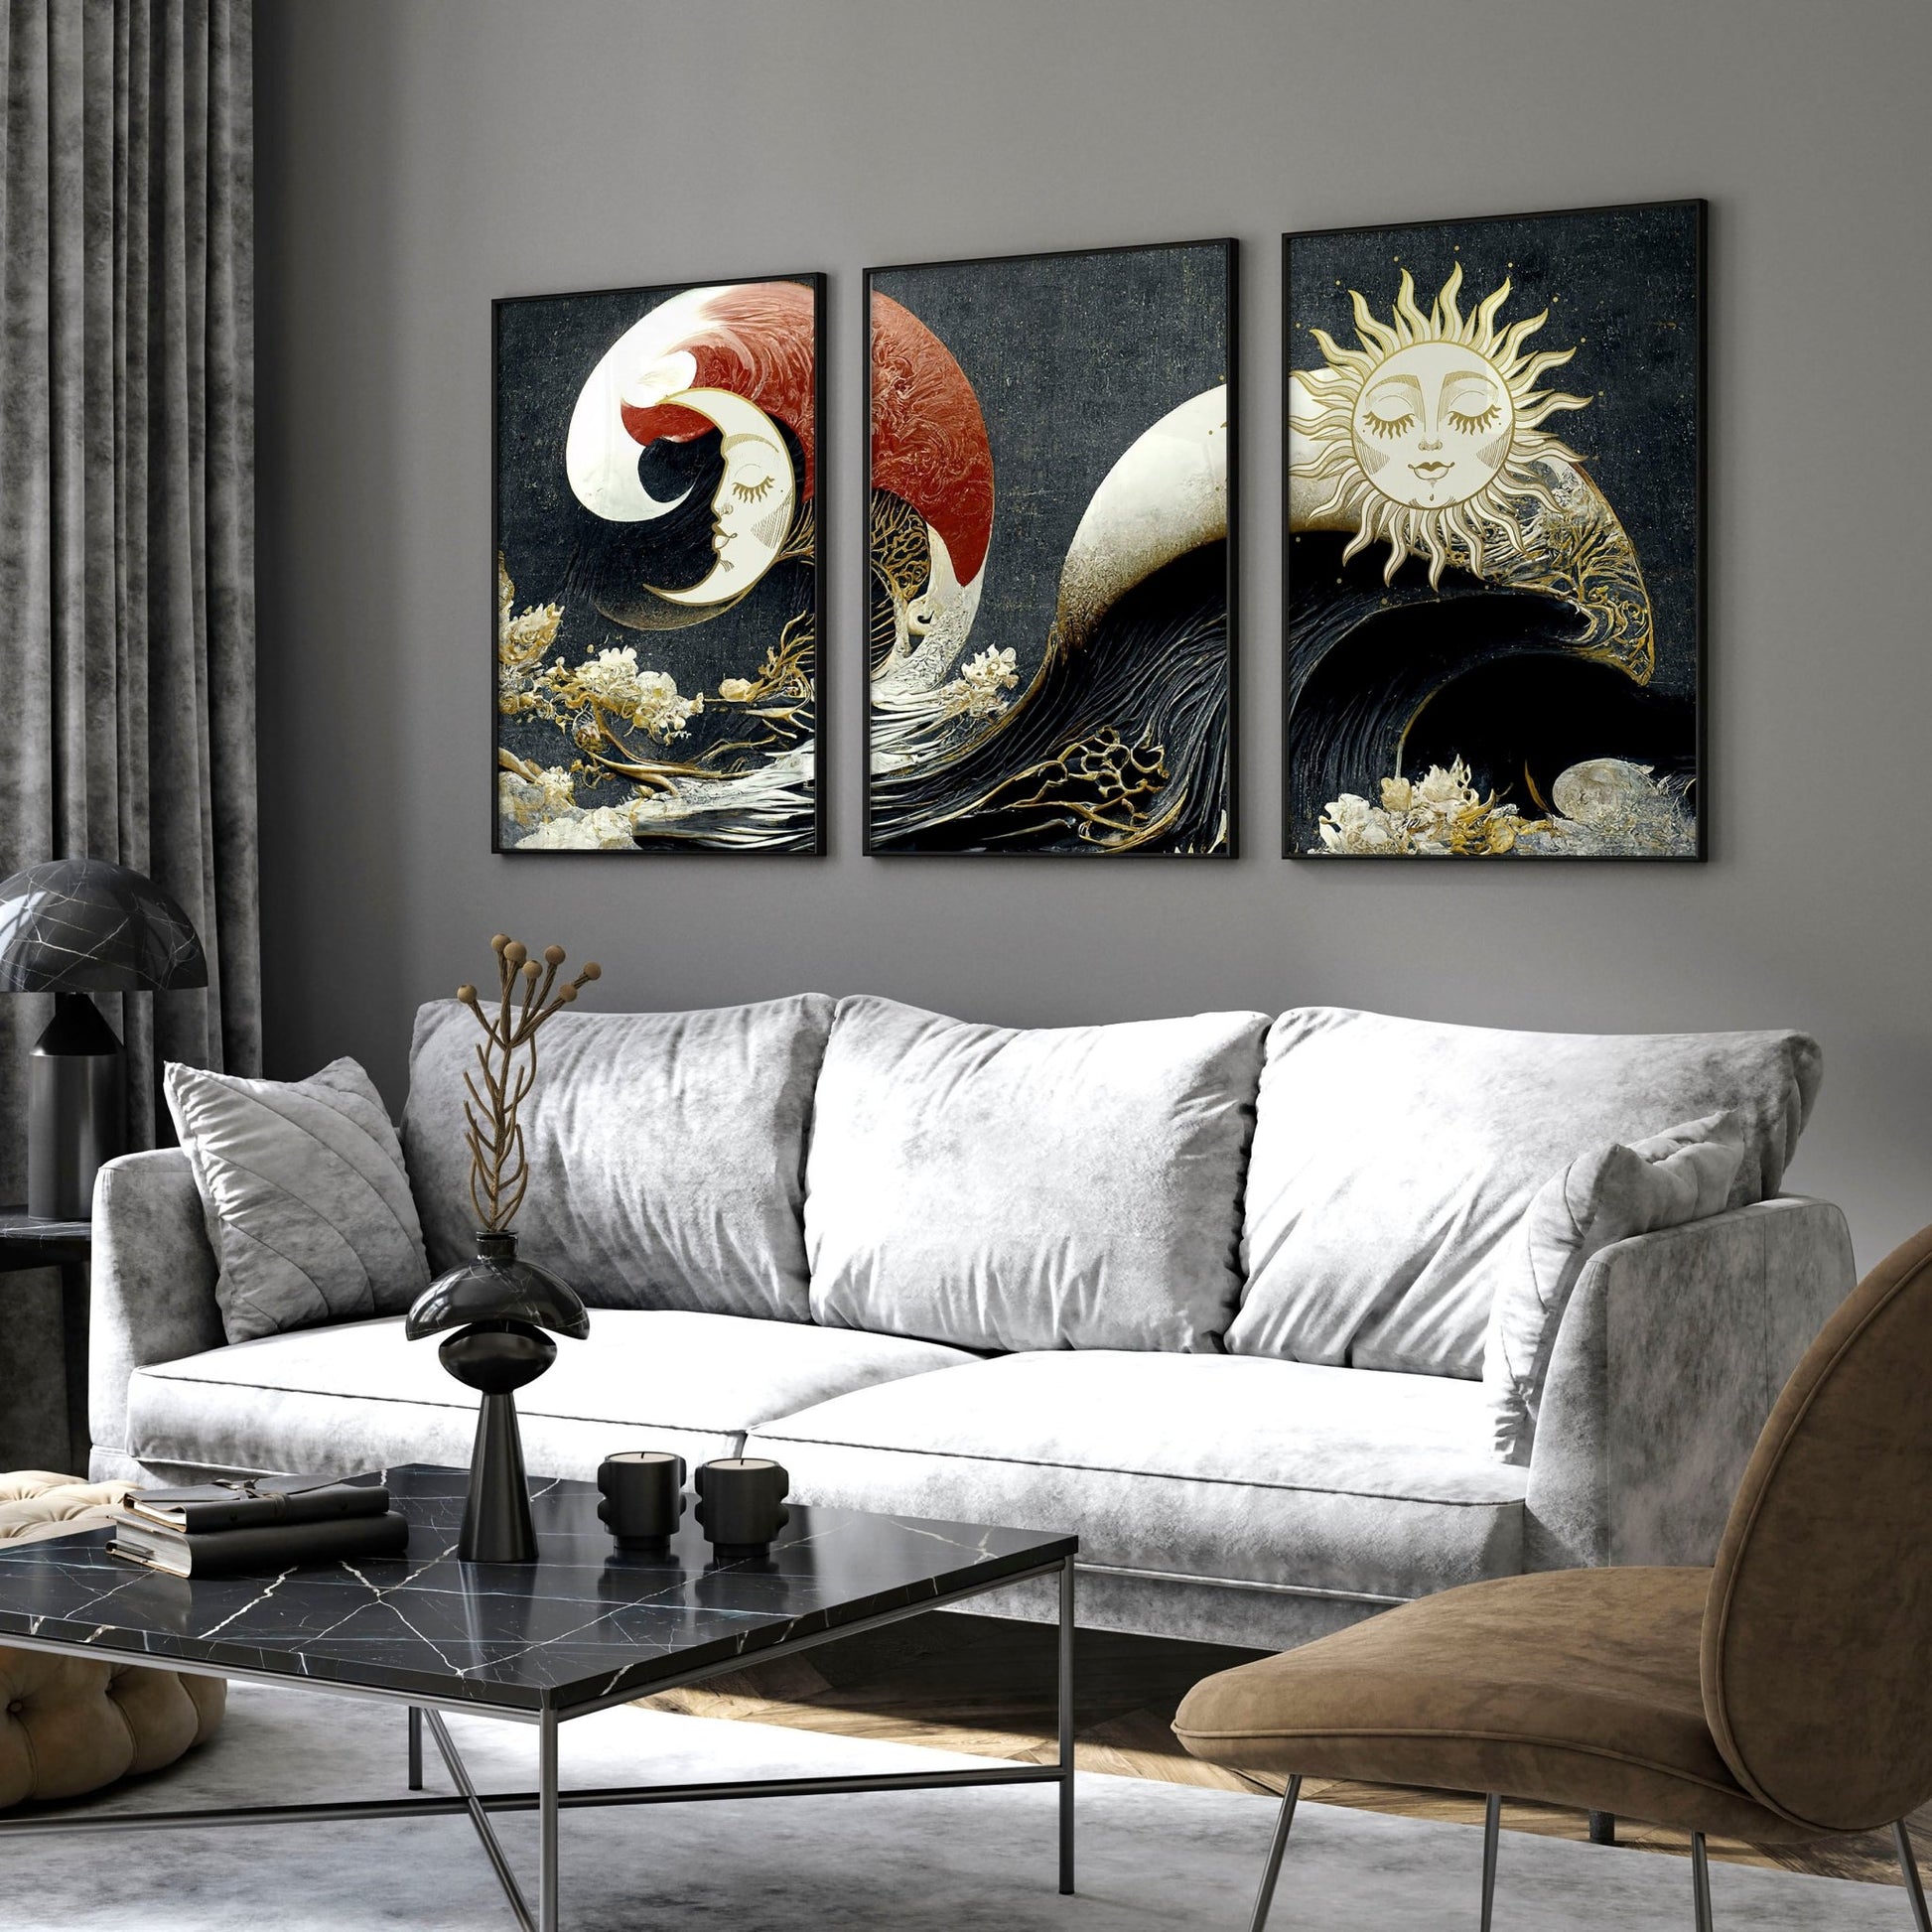 Japanese Sun and Moon pictures for living room wall | set of 3 art prints - About Wall Art